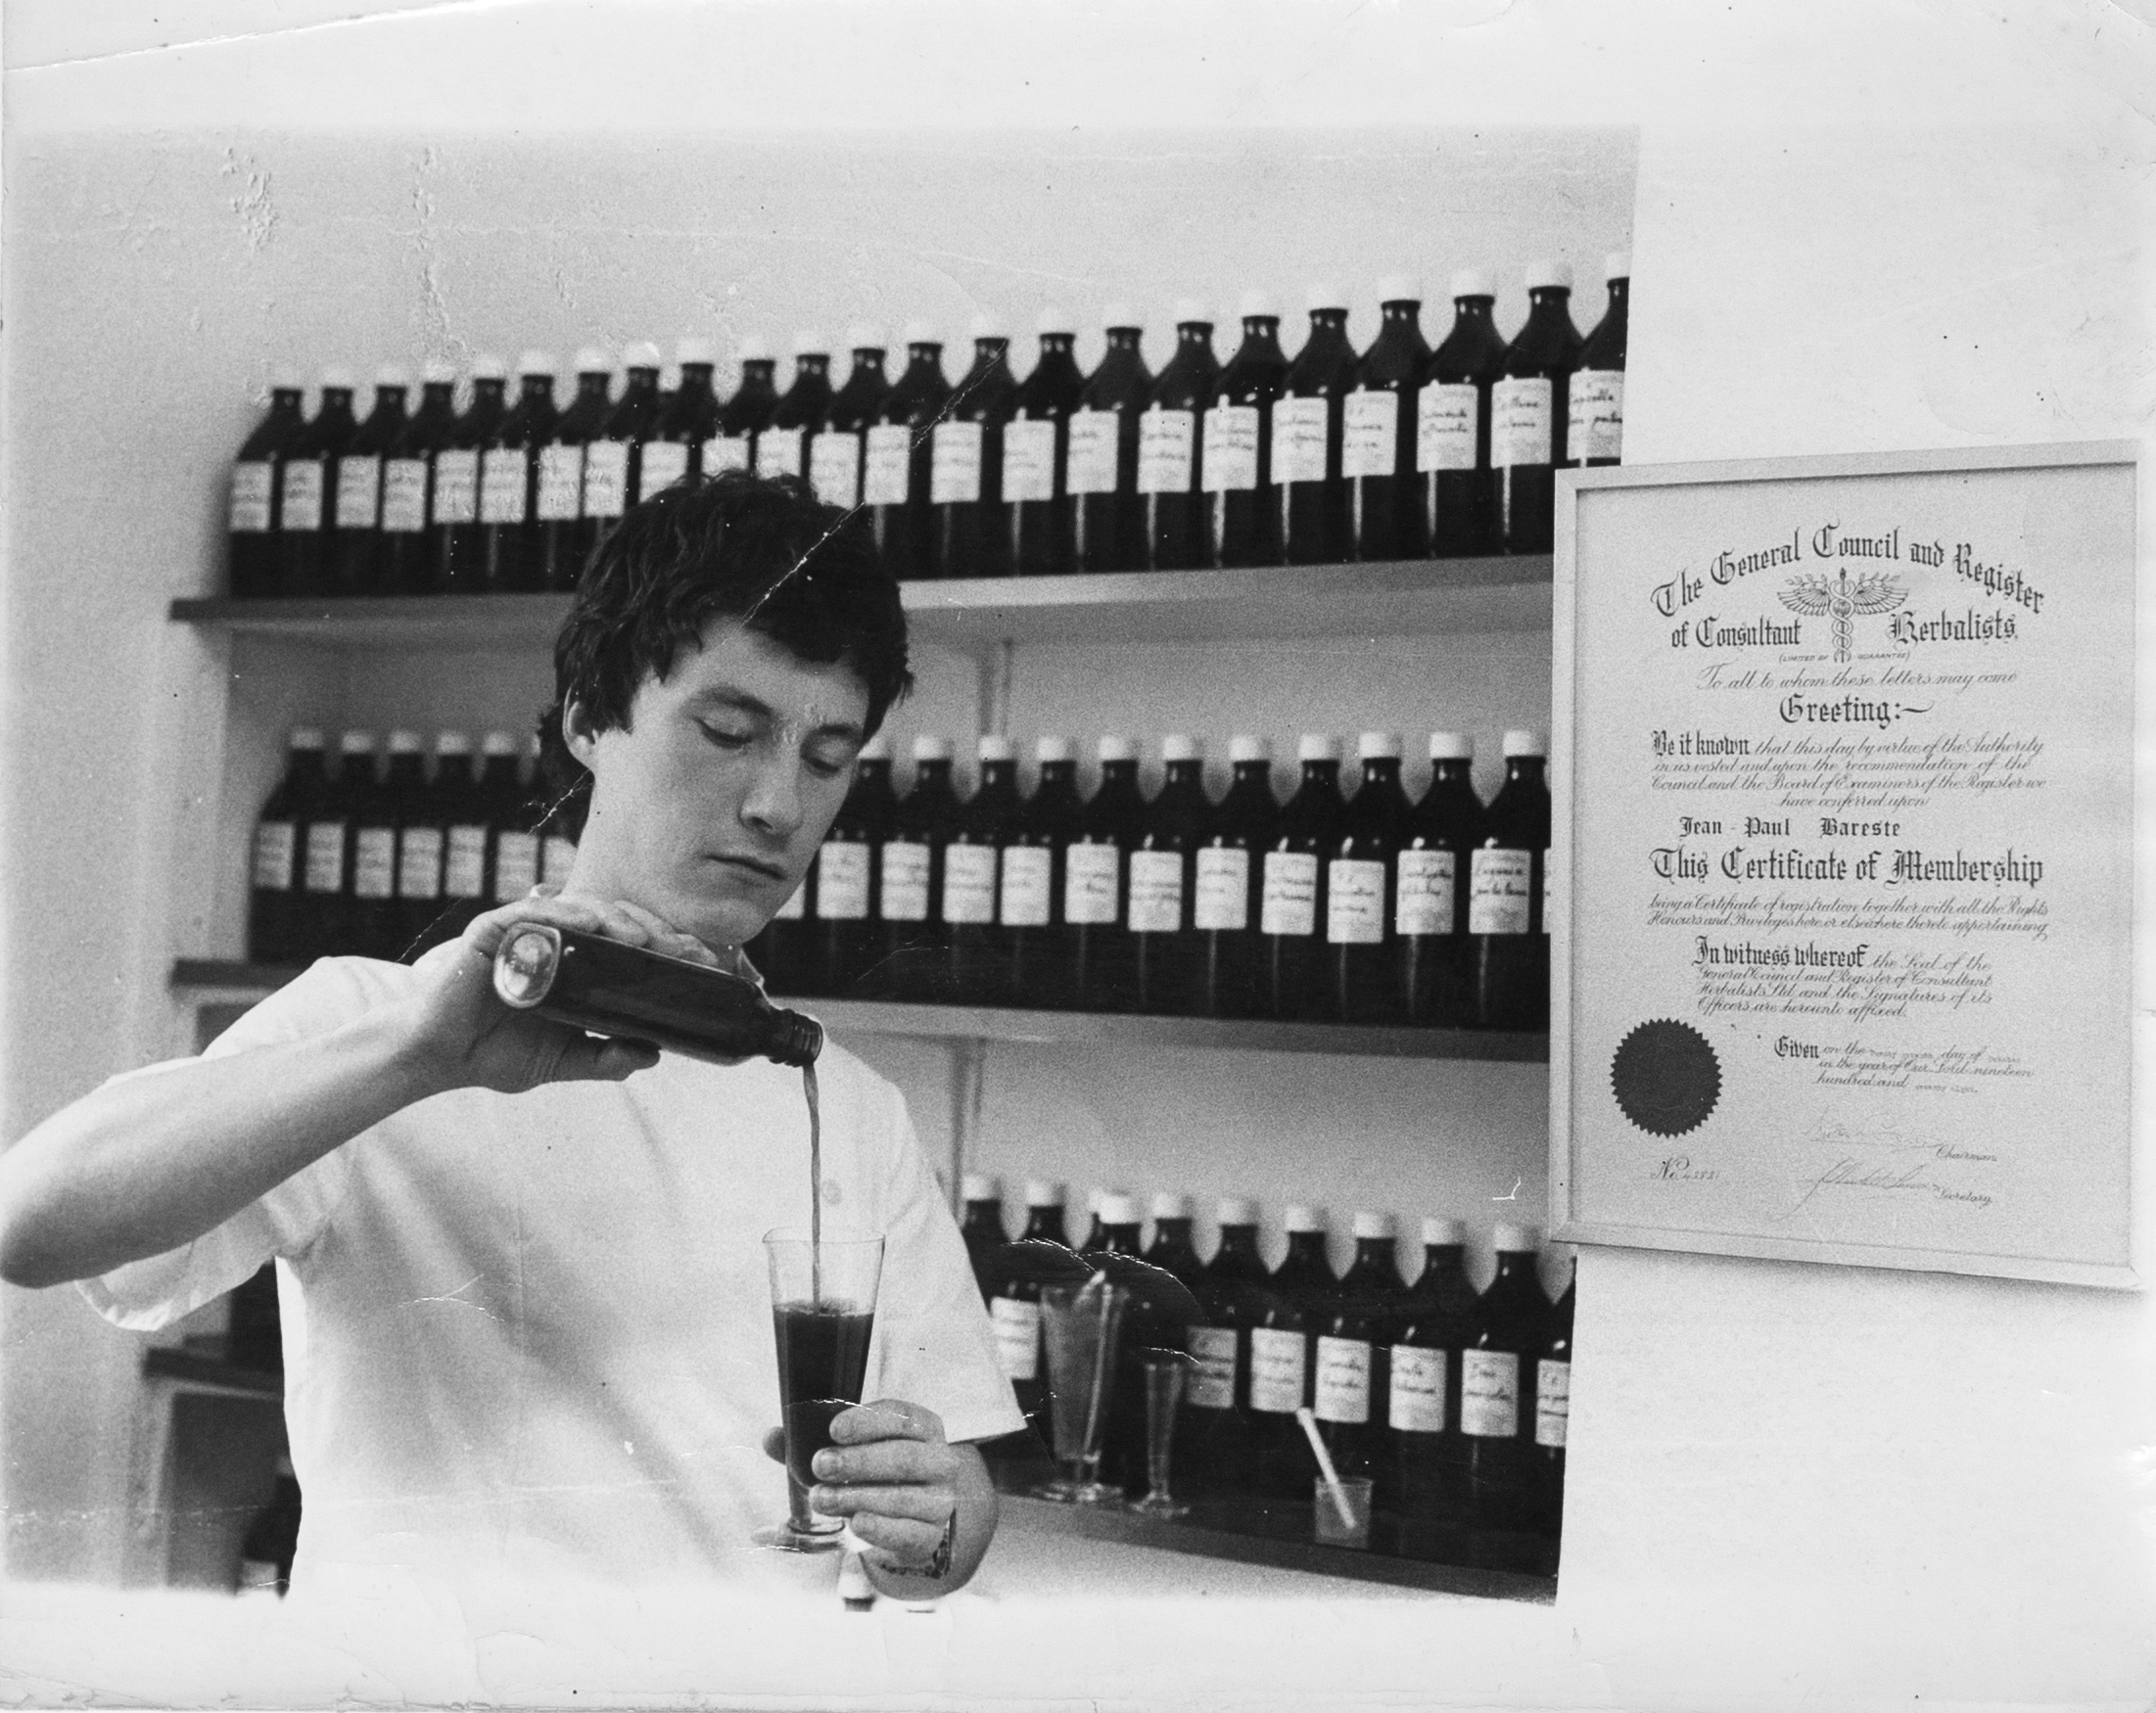 In this black and white photo, Jean-Paul Barestepours a dark liquid out of a bottle and into a glass. He wears a white lab coat and stands in front of three shelves of bottled liquids, and a diploma hangs on the wall to his right.